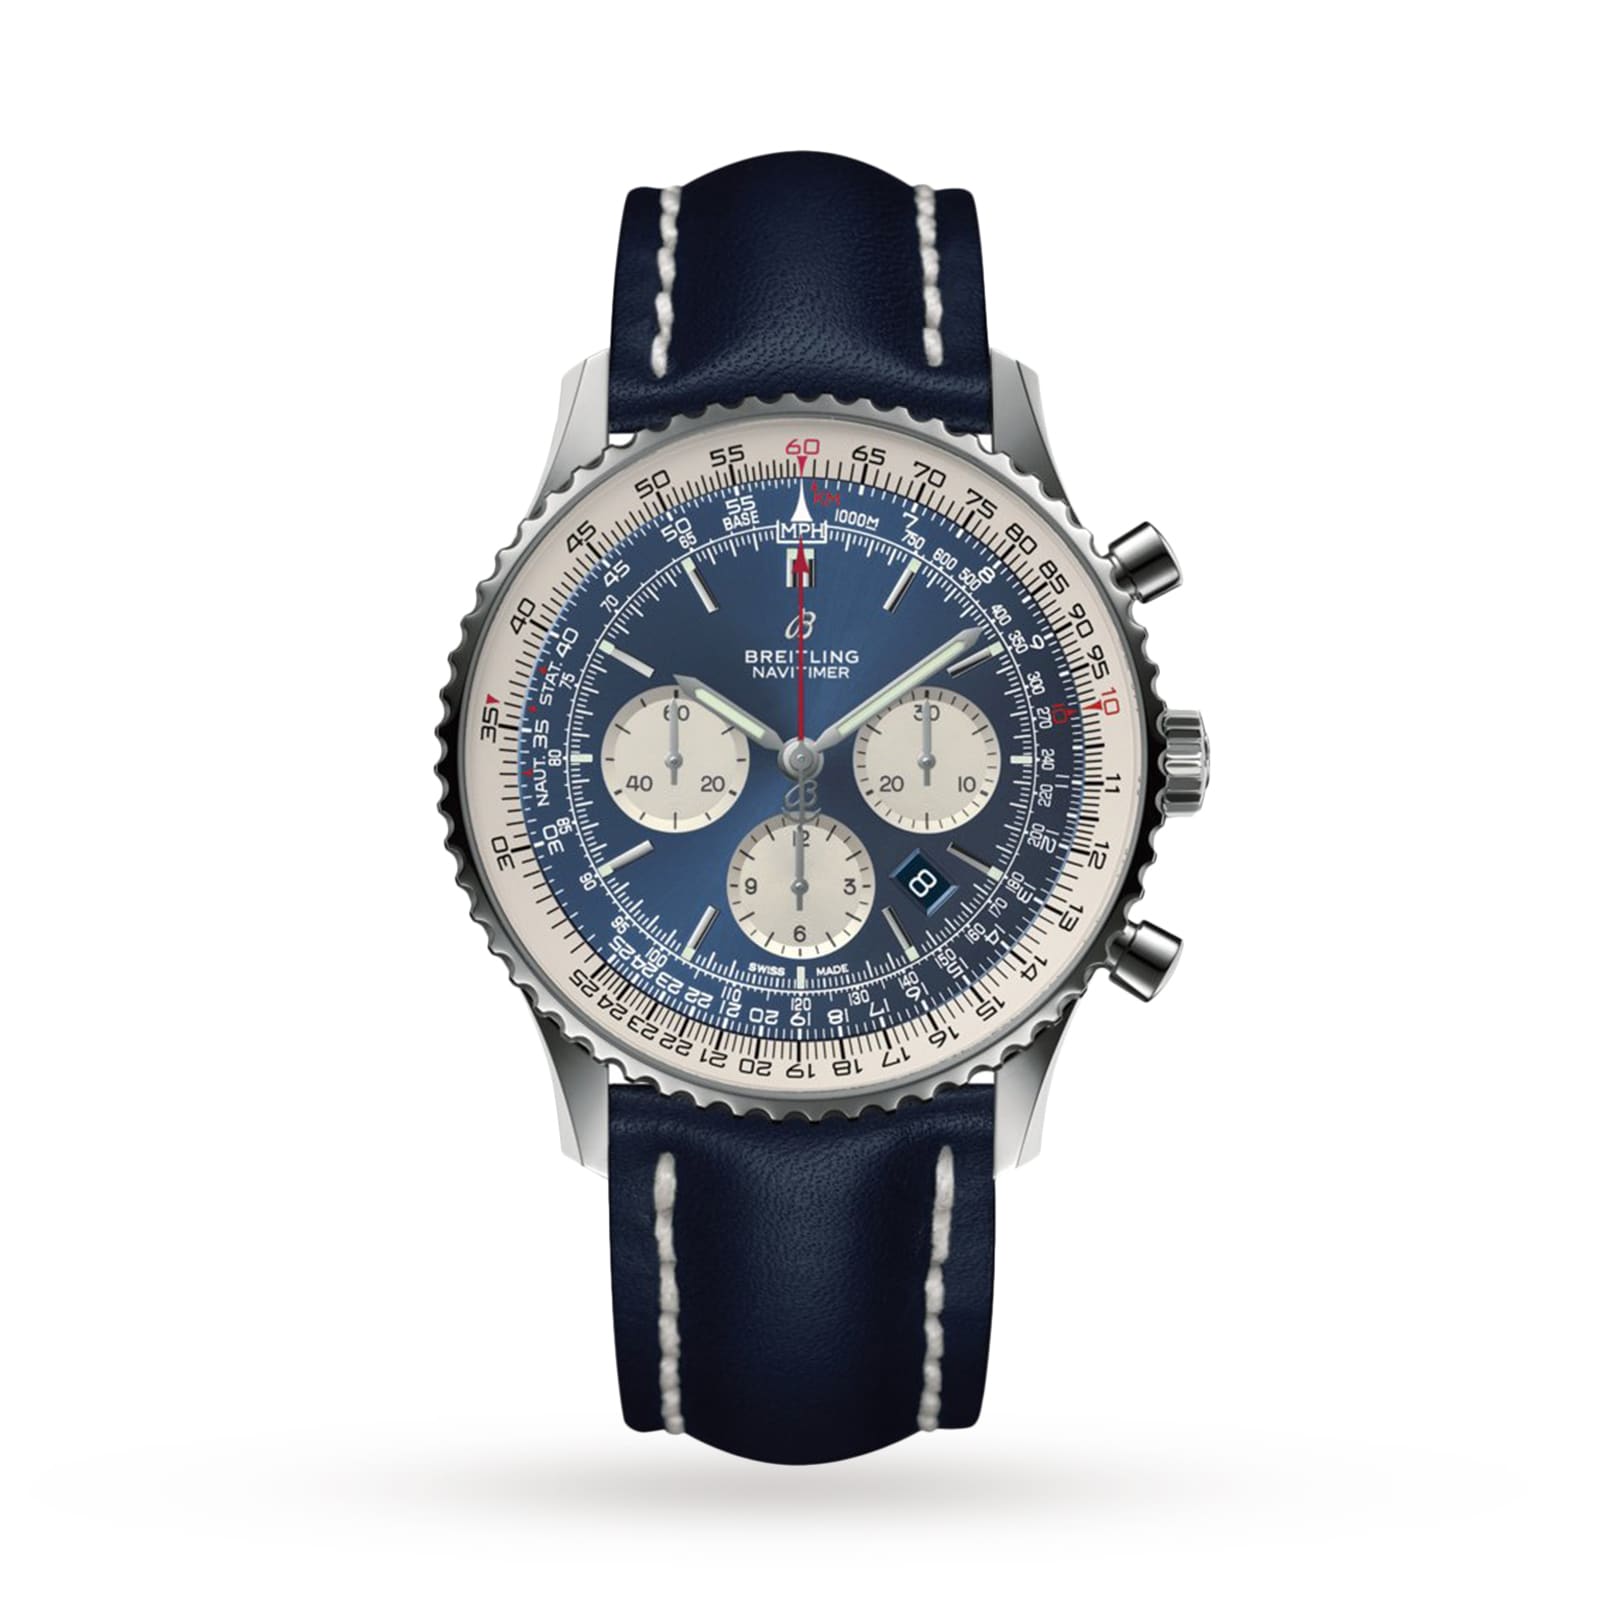 Breitling Navitimer B01 Chronograph 46 Stainless Steel 46mm Black Dial  Leather Strap AB0127211B1X1 - BRAND NEW